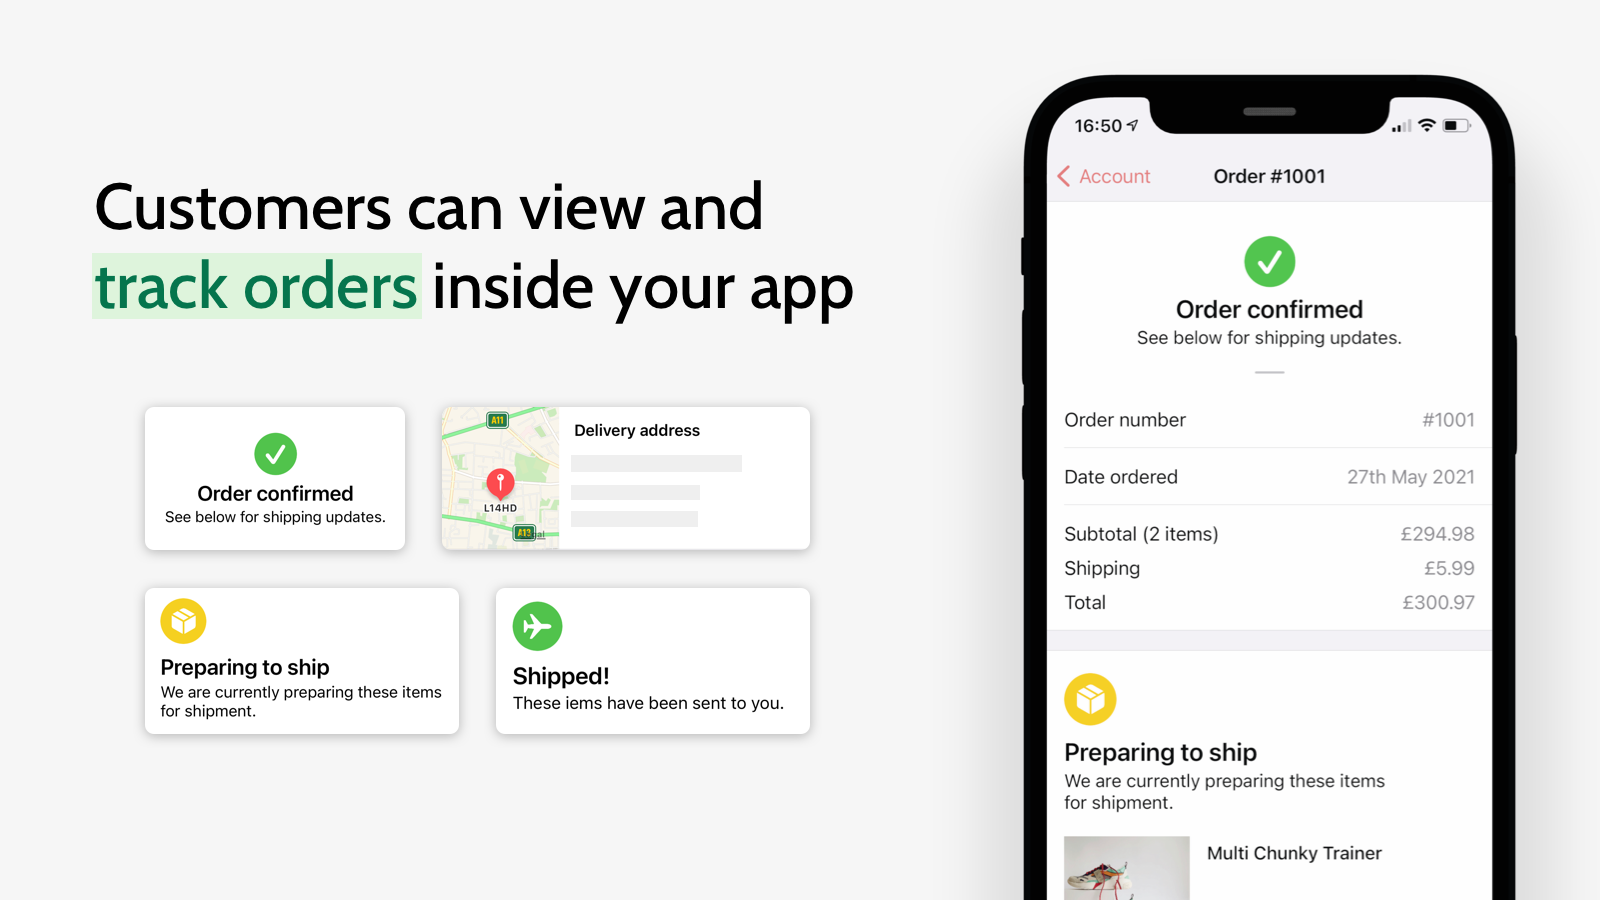 Customers can view and track orders inside your app